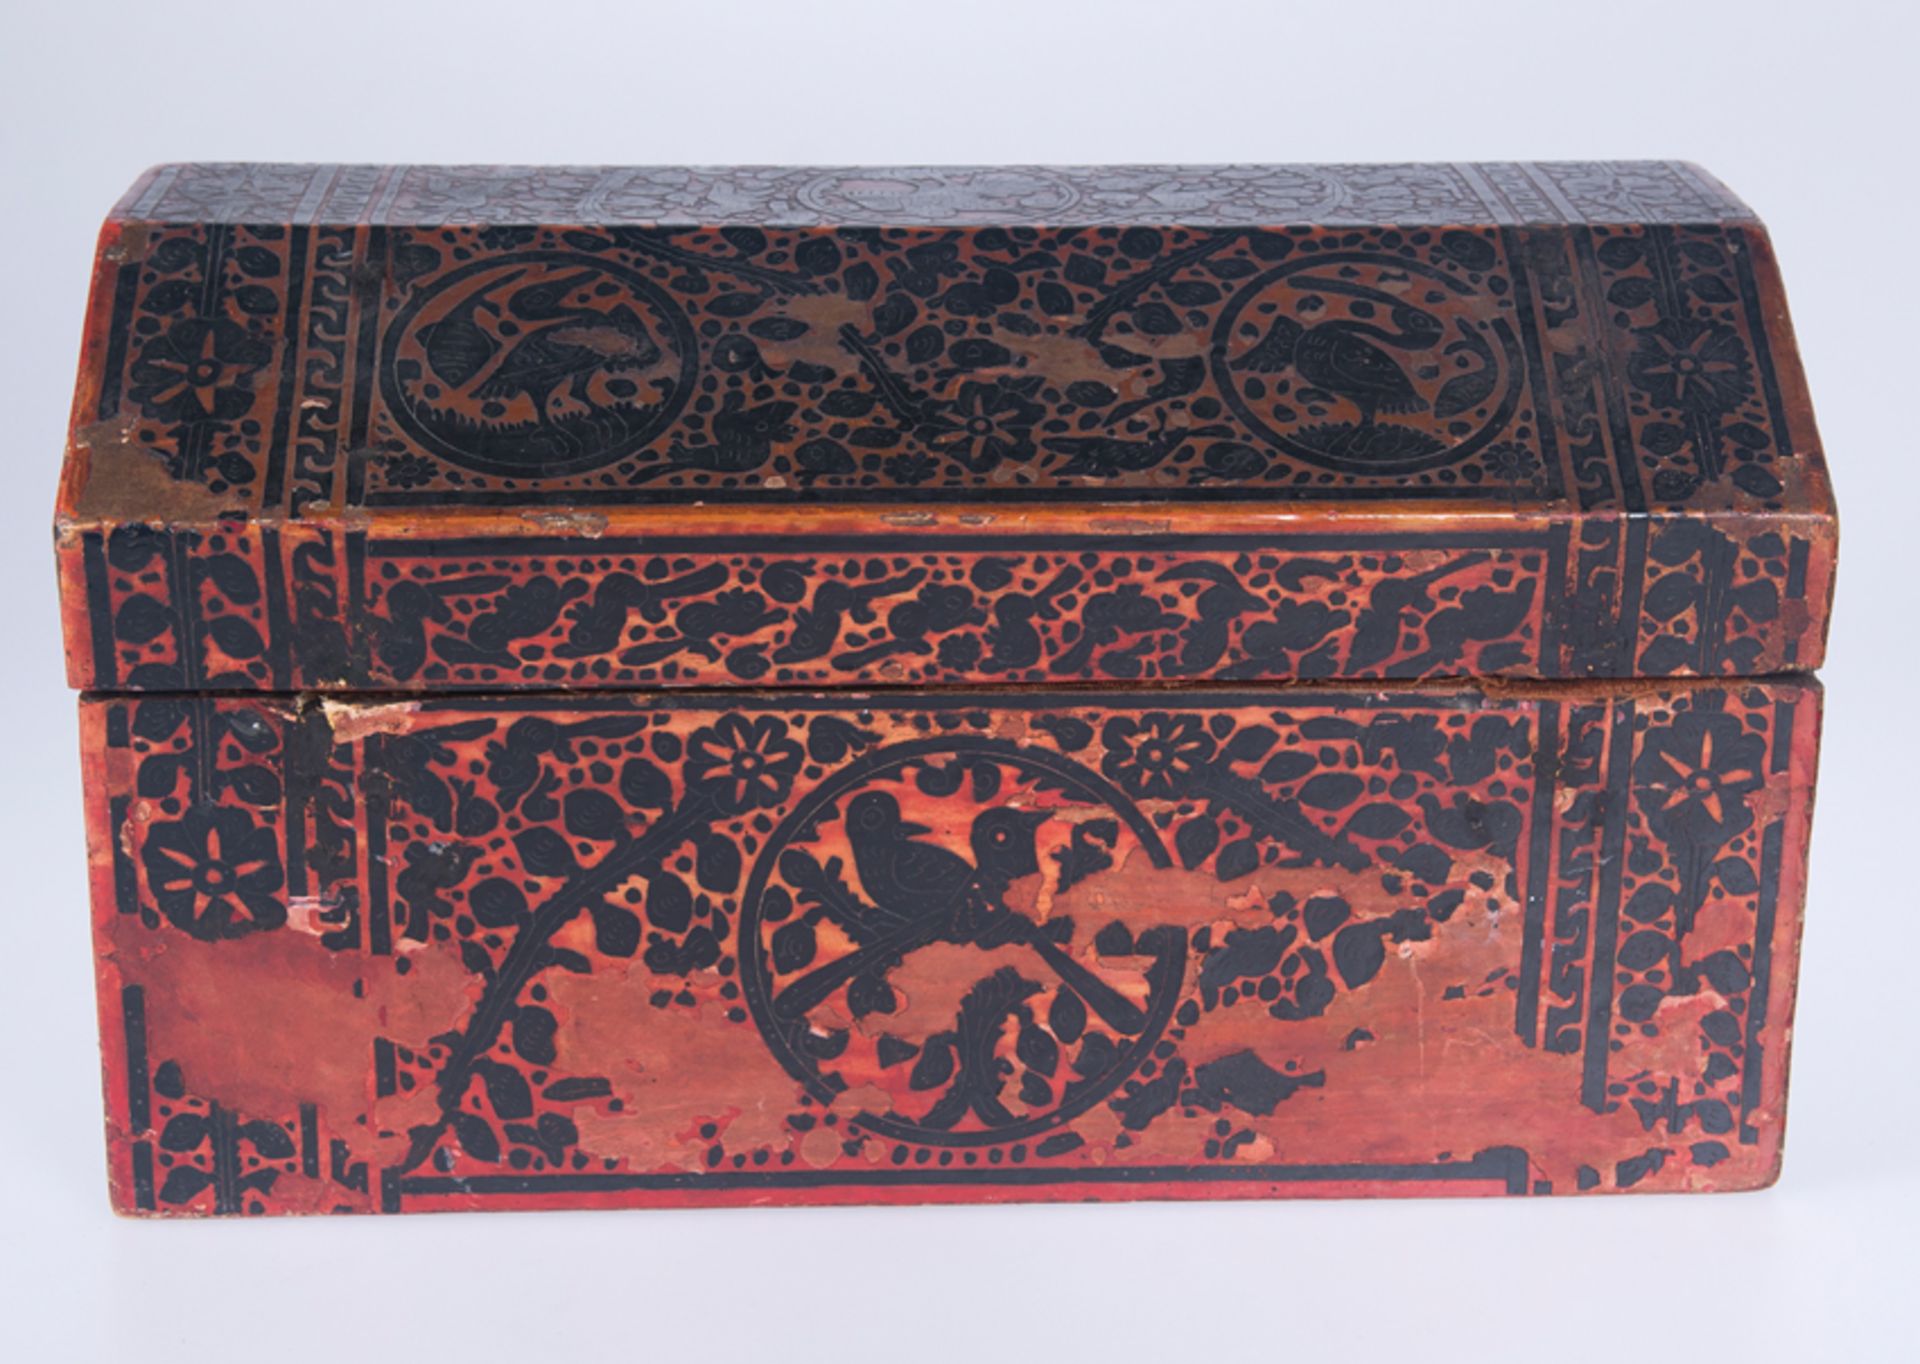 Carved and lacquered wooden chest,Mexican lacquer or Japanning...Worked in Olinalá,Guerrero.18th cen - Image 2 of 9